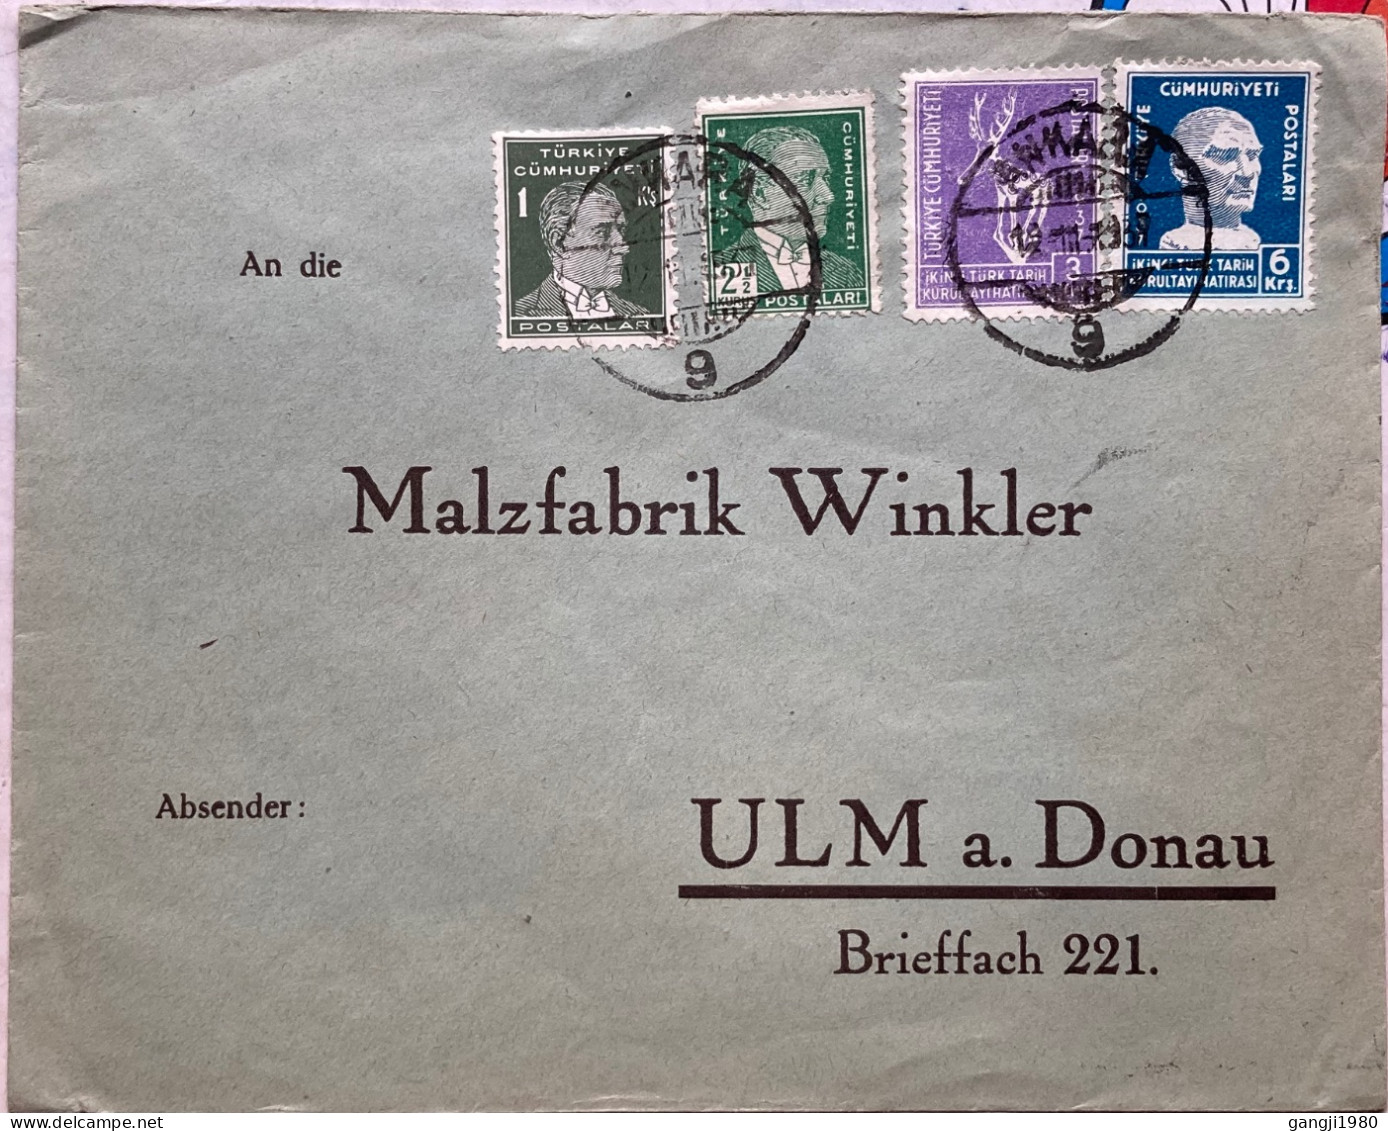 TURKEY 1940, COVER USED TO GERMANY, 4 DIFFERENT STAMP, ANIMAL, PRESIDENT KEMAL ATATURK, ANKARA CITY CANCEL. - Lettres & Documents